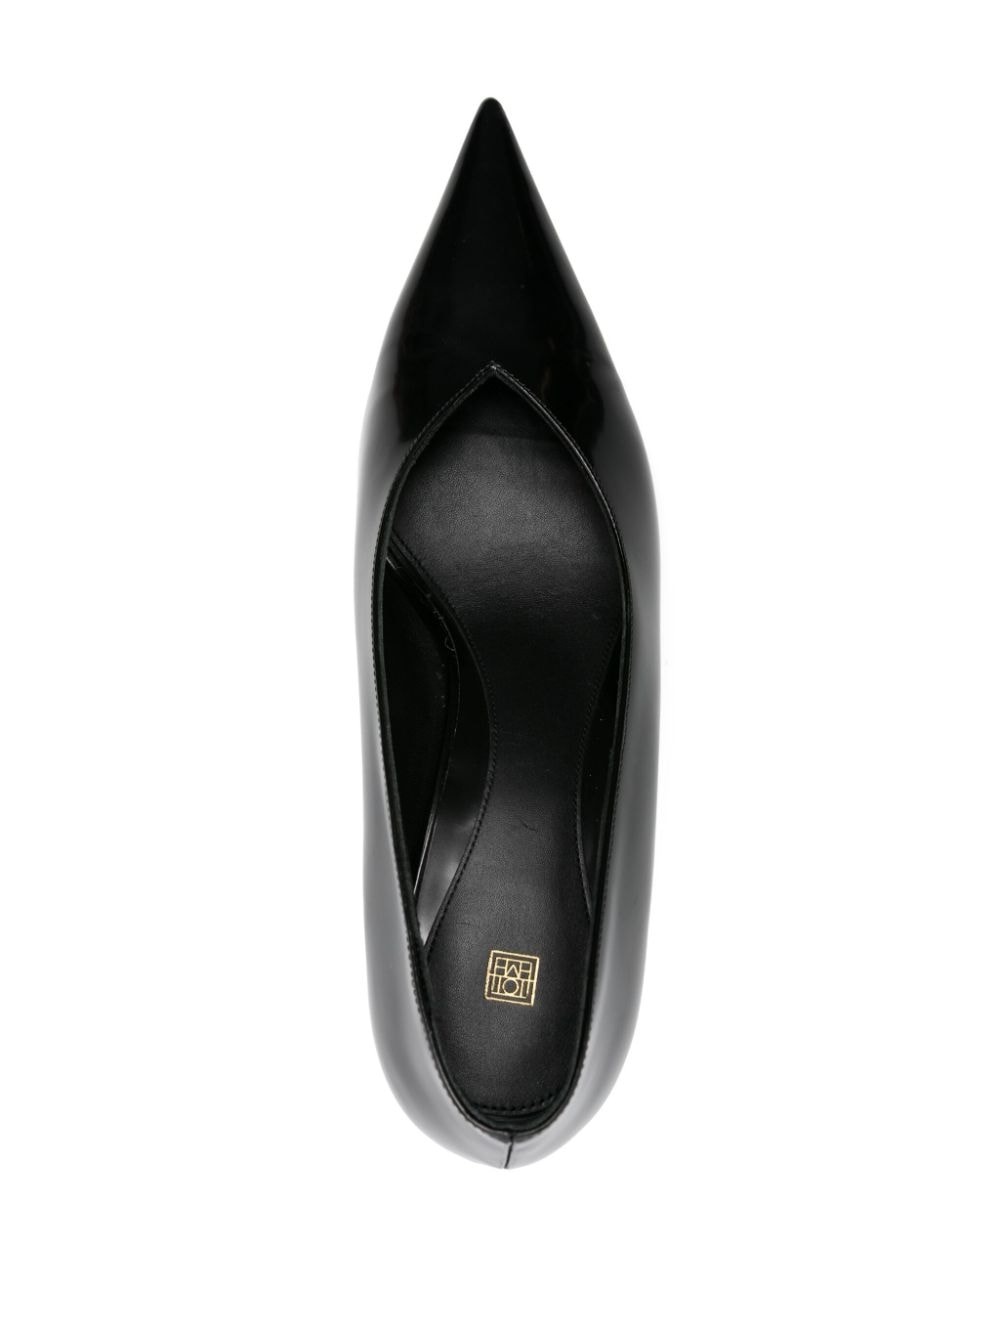 55mm pointed-toe leather pumps - 4